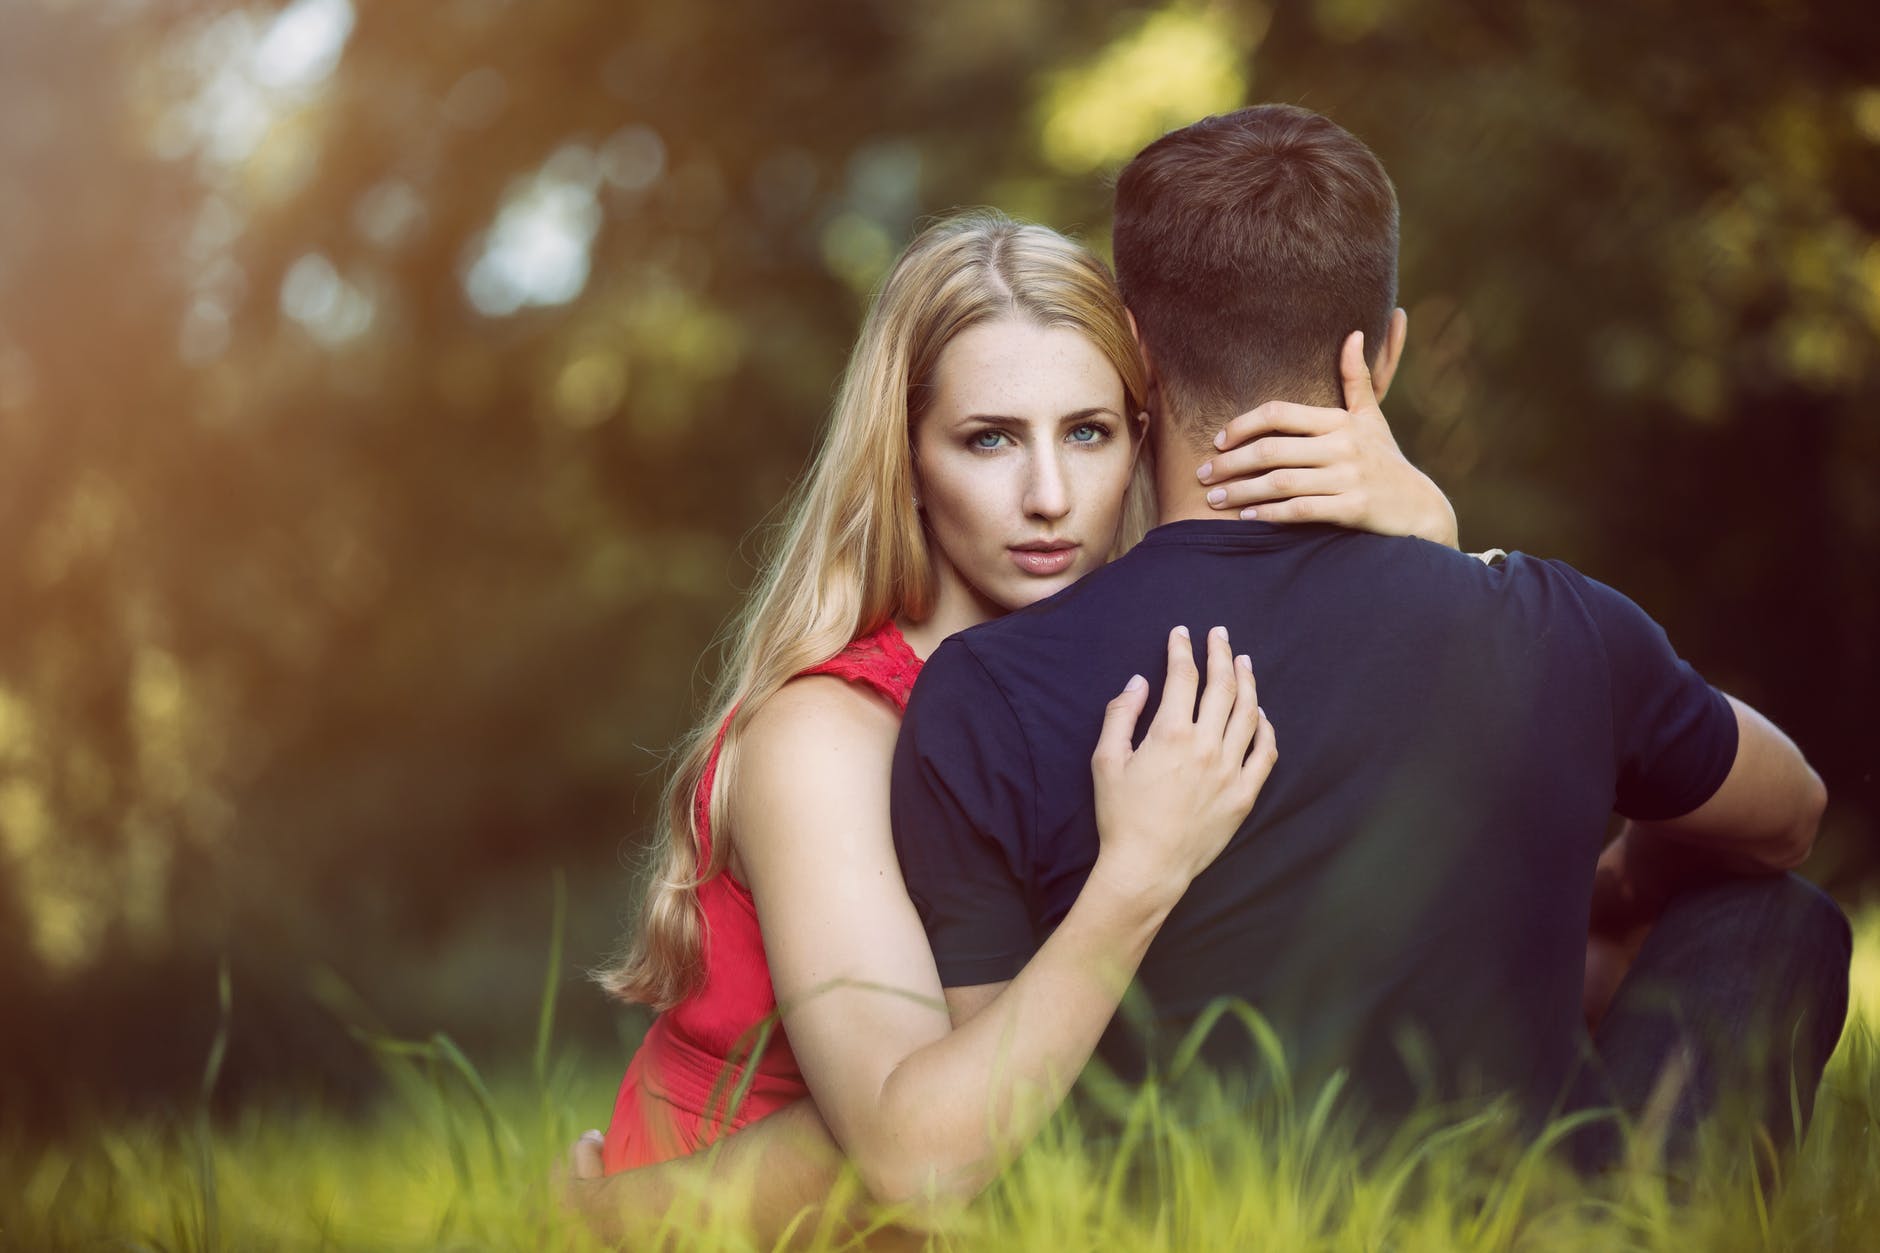 Relationship Advice: 7 Tips to deal with a jealous and possessive partner